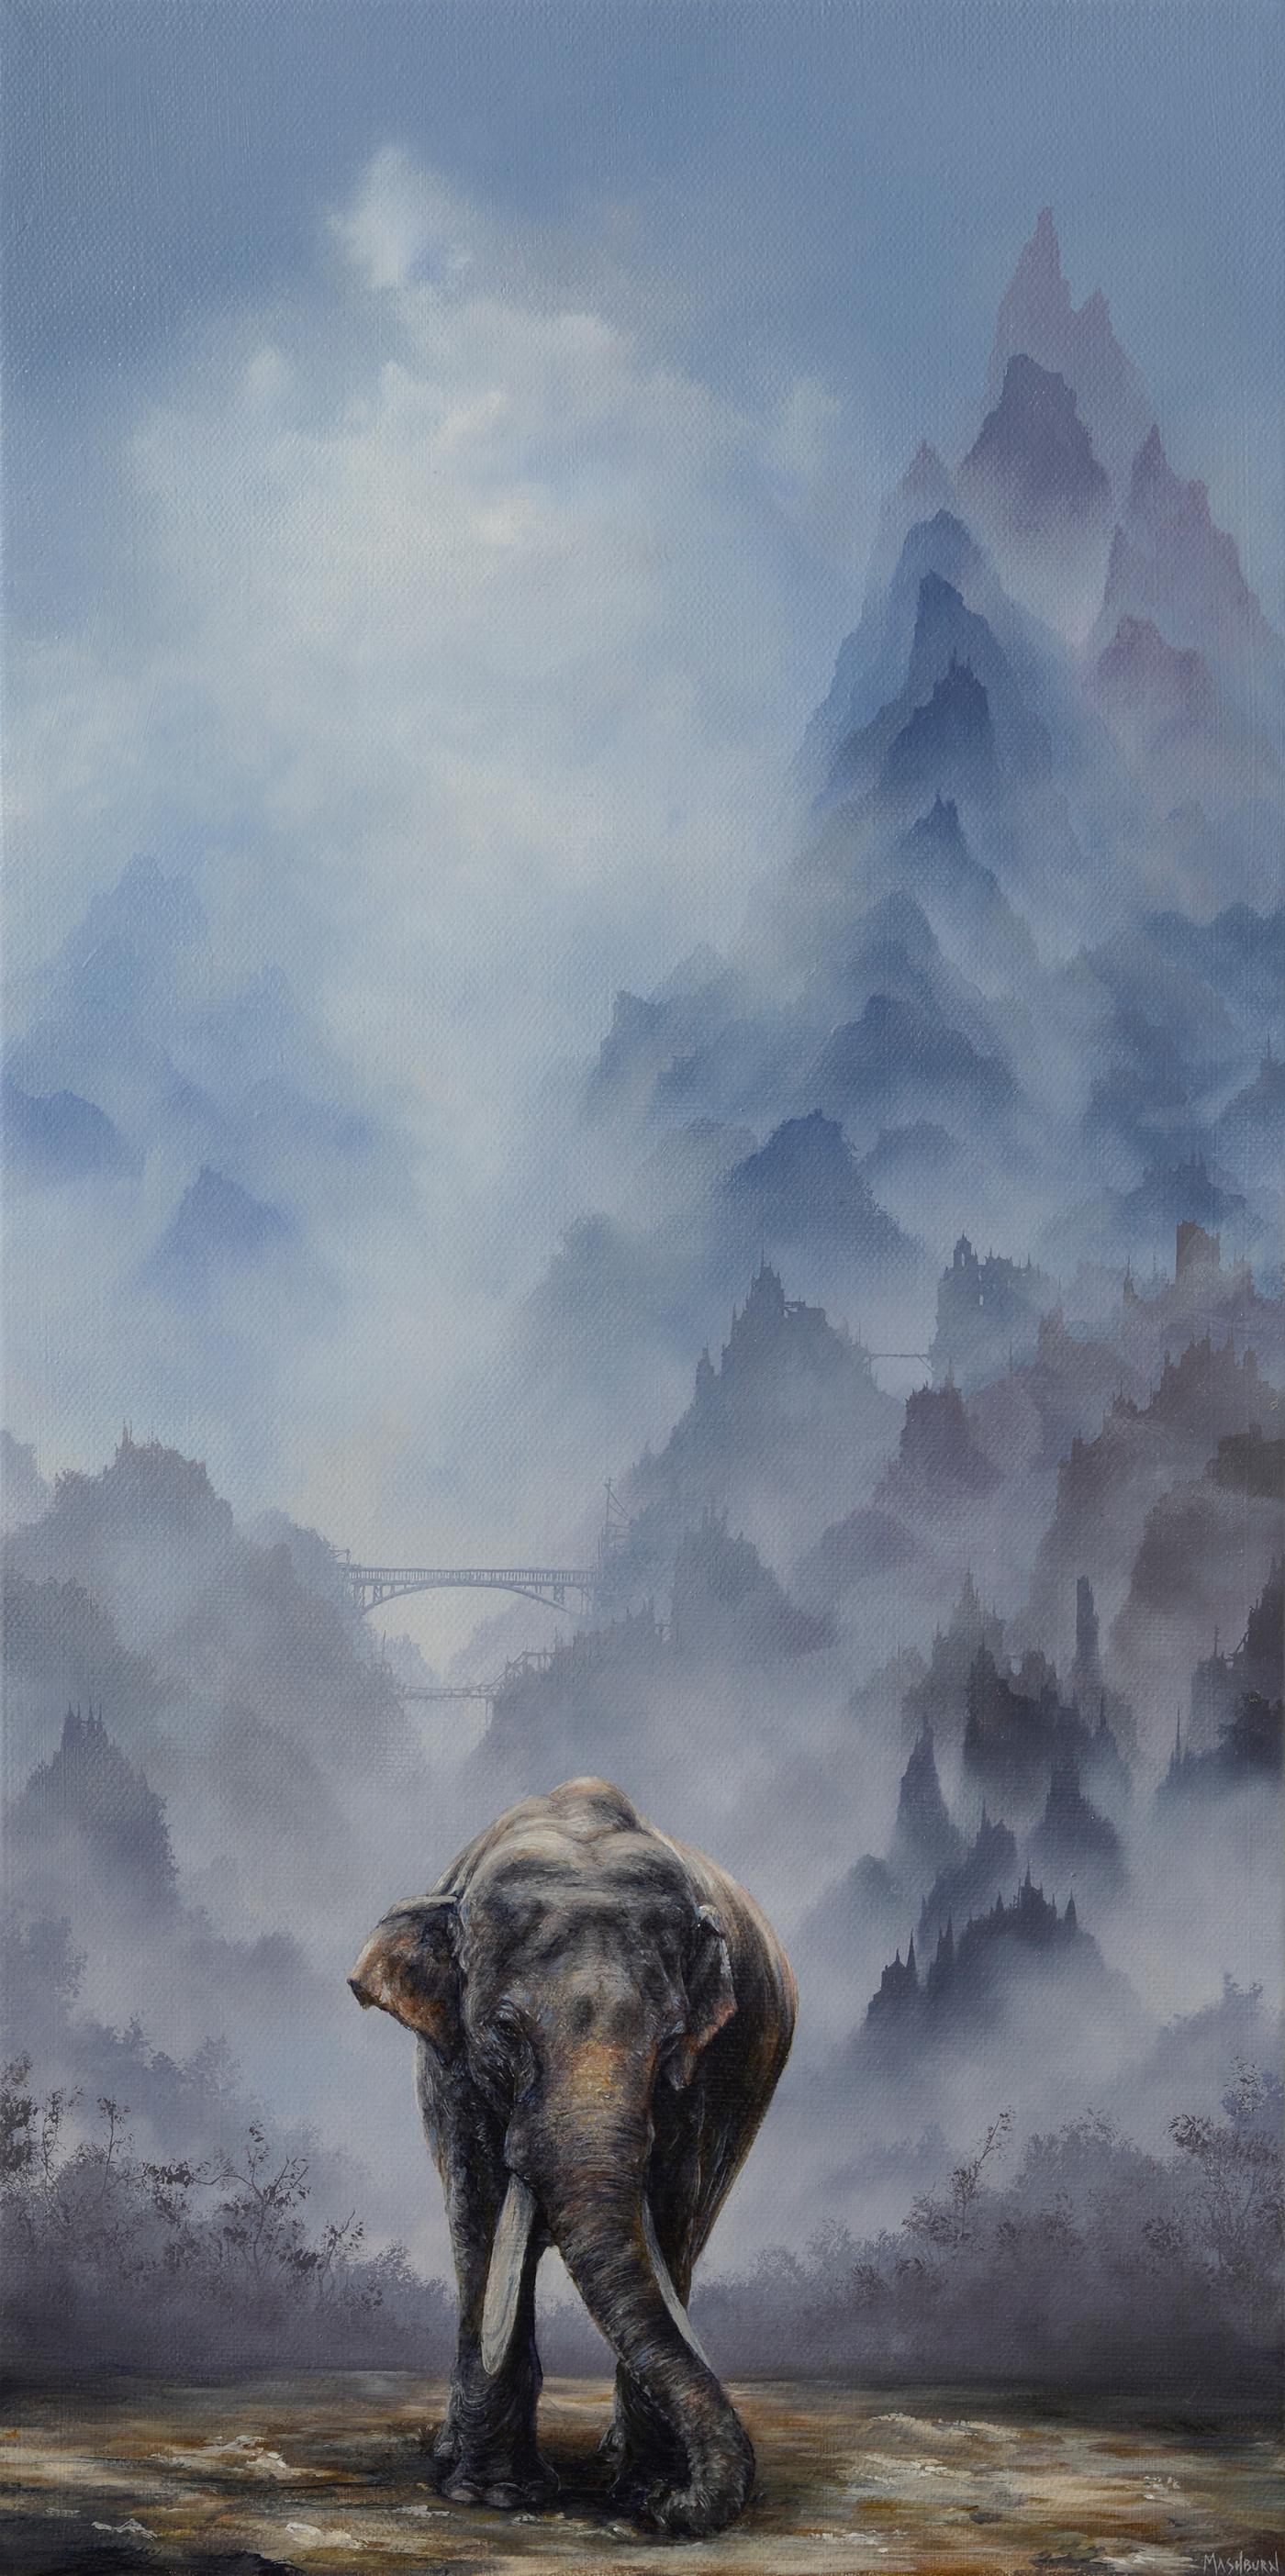 Brian Mashburn Landscape Painting - "Asian Elephant Standing Before Hazy Blue Mountains" Original oil painting